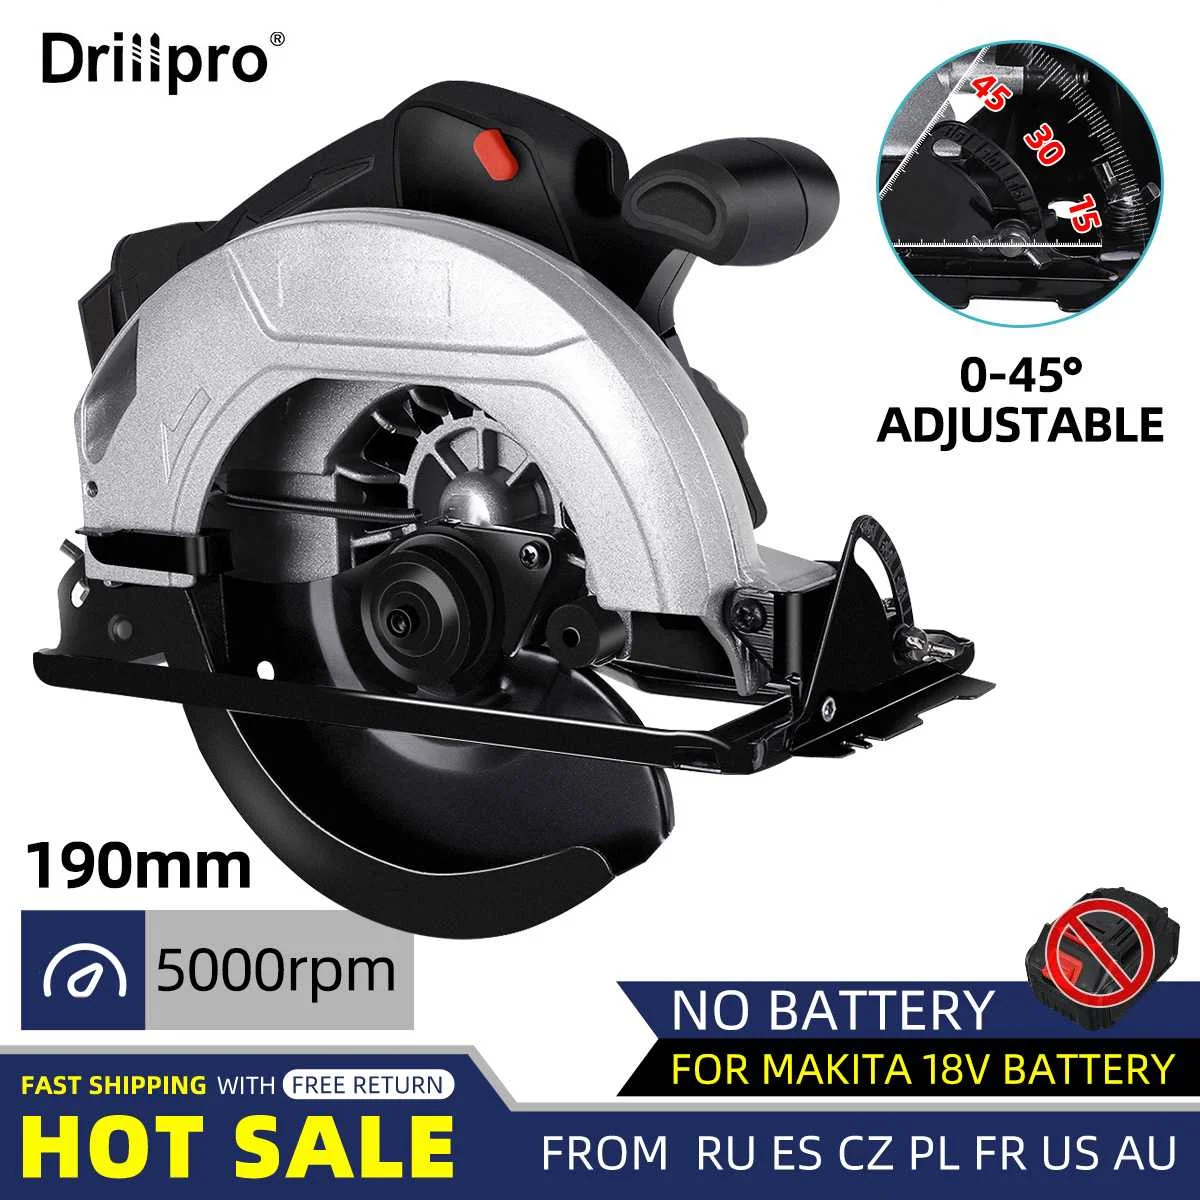 

Drillpro 18V Cordless Electric Circular Saw 5000RPM 190mm Dust Passage Woodworking Cutting Machine Tools for Makita 18V Battery